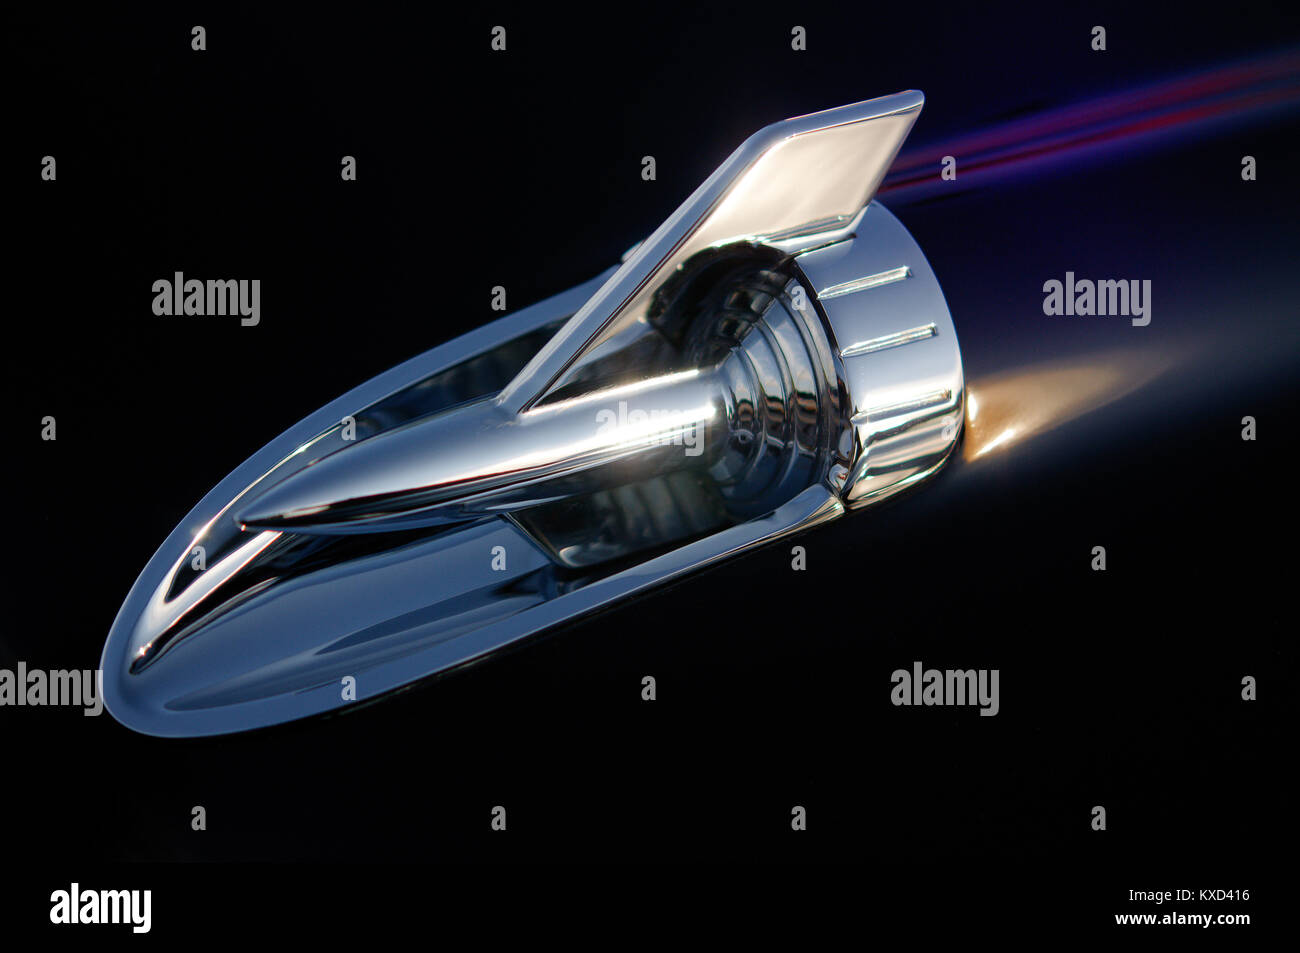 Hood ornament on a 1957 classic American car that resembles a traveling rocket ship in space Stock Photo